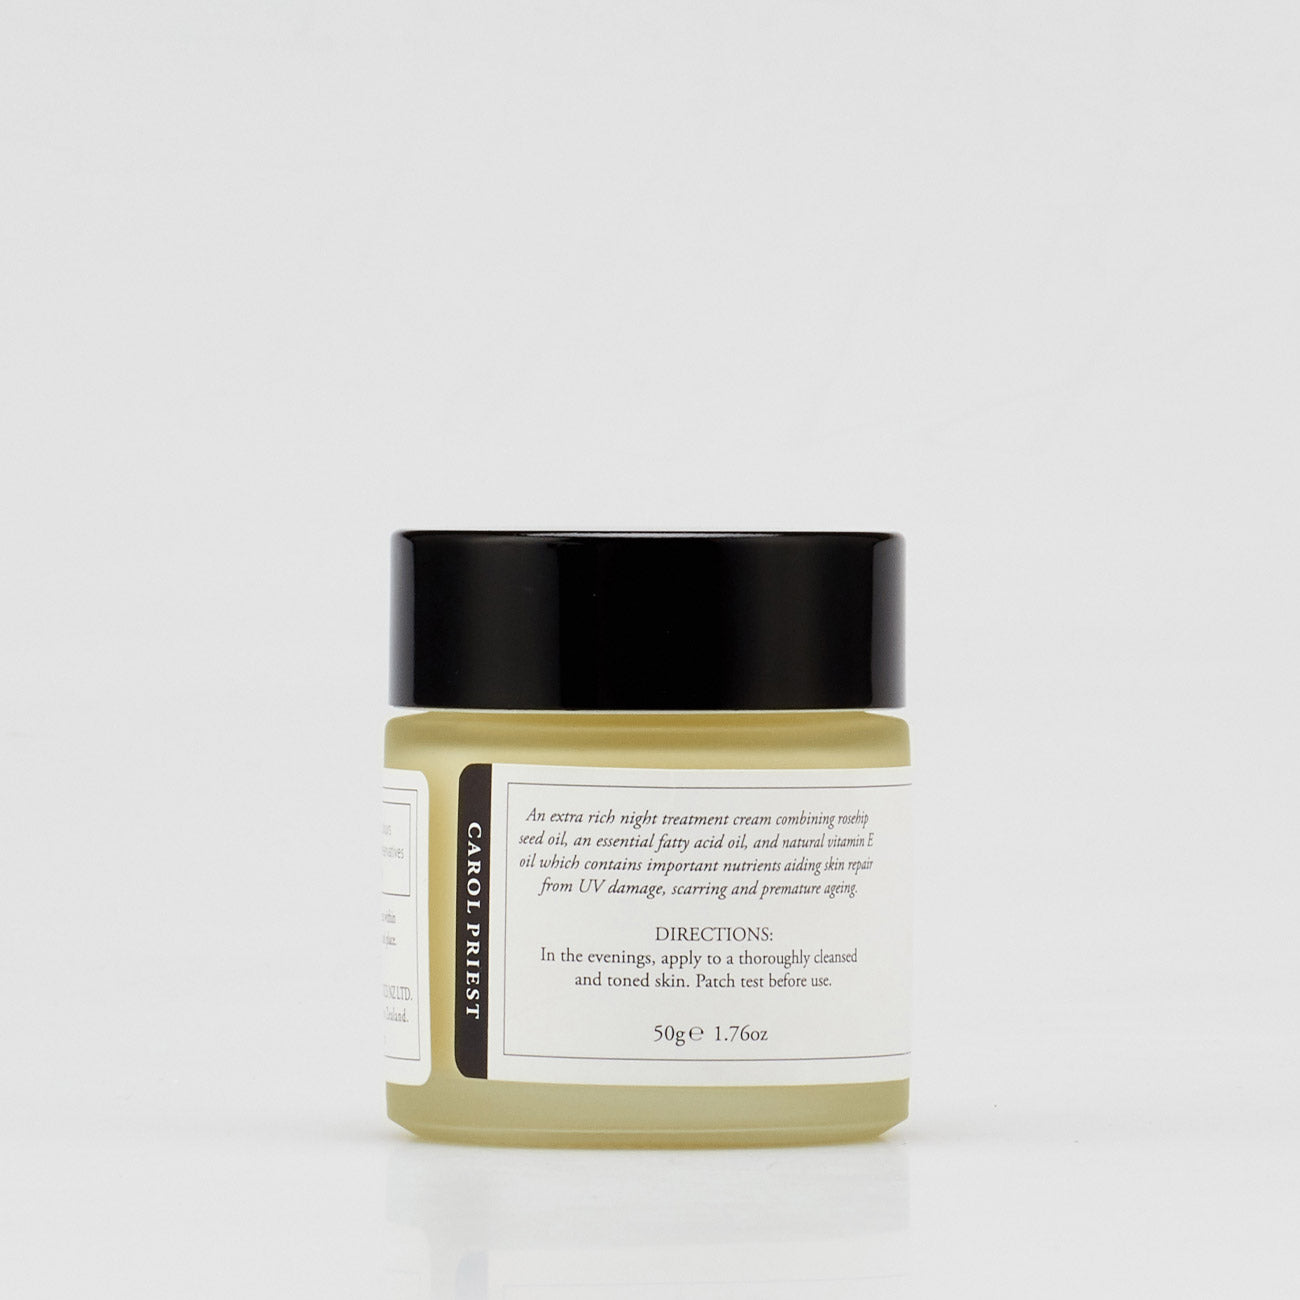 Image displaying Rosehip & Vitamin E Regenerative Night, a natural and organic cosmetic product from Carol Priest.